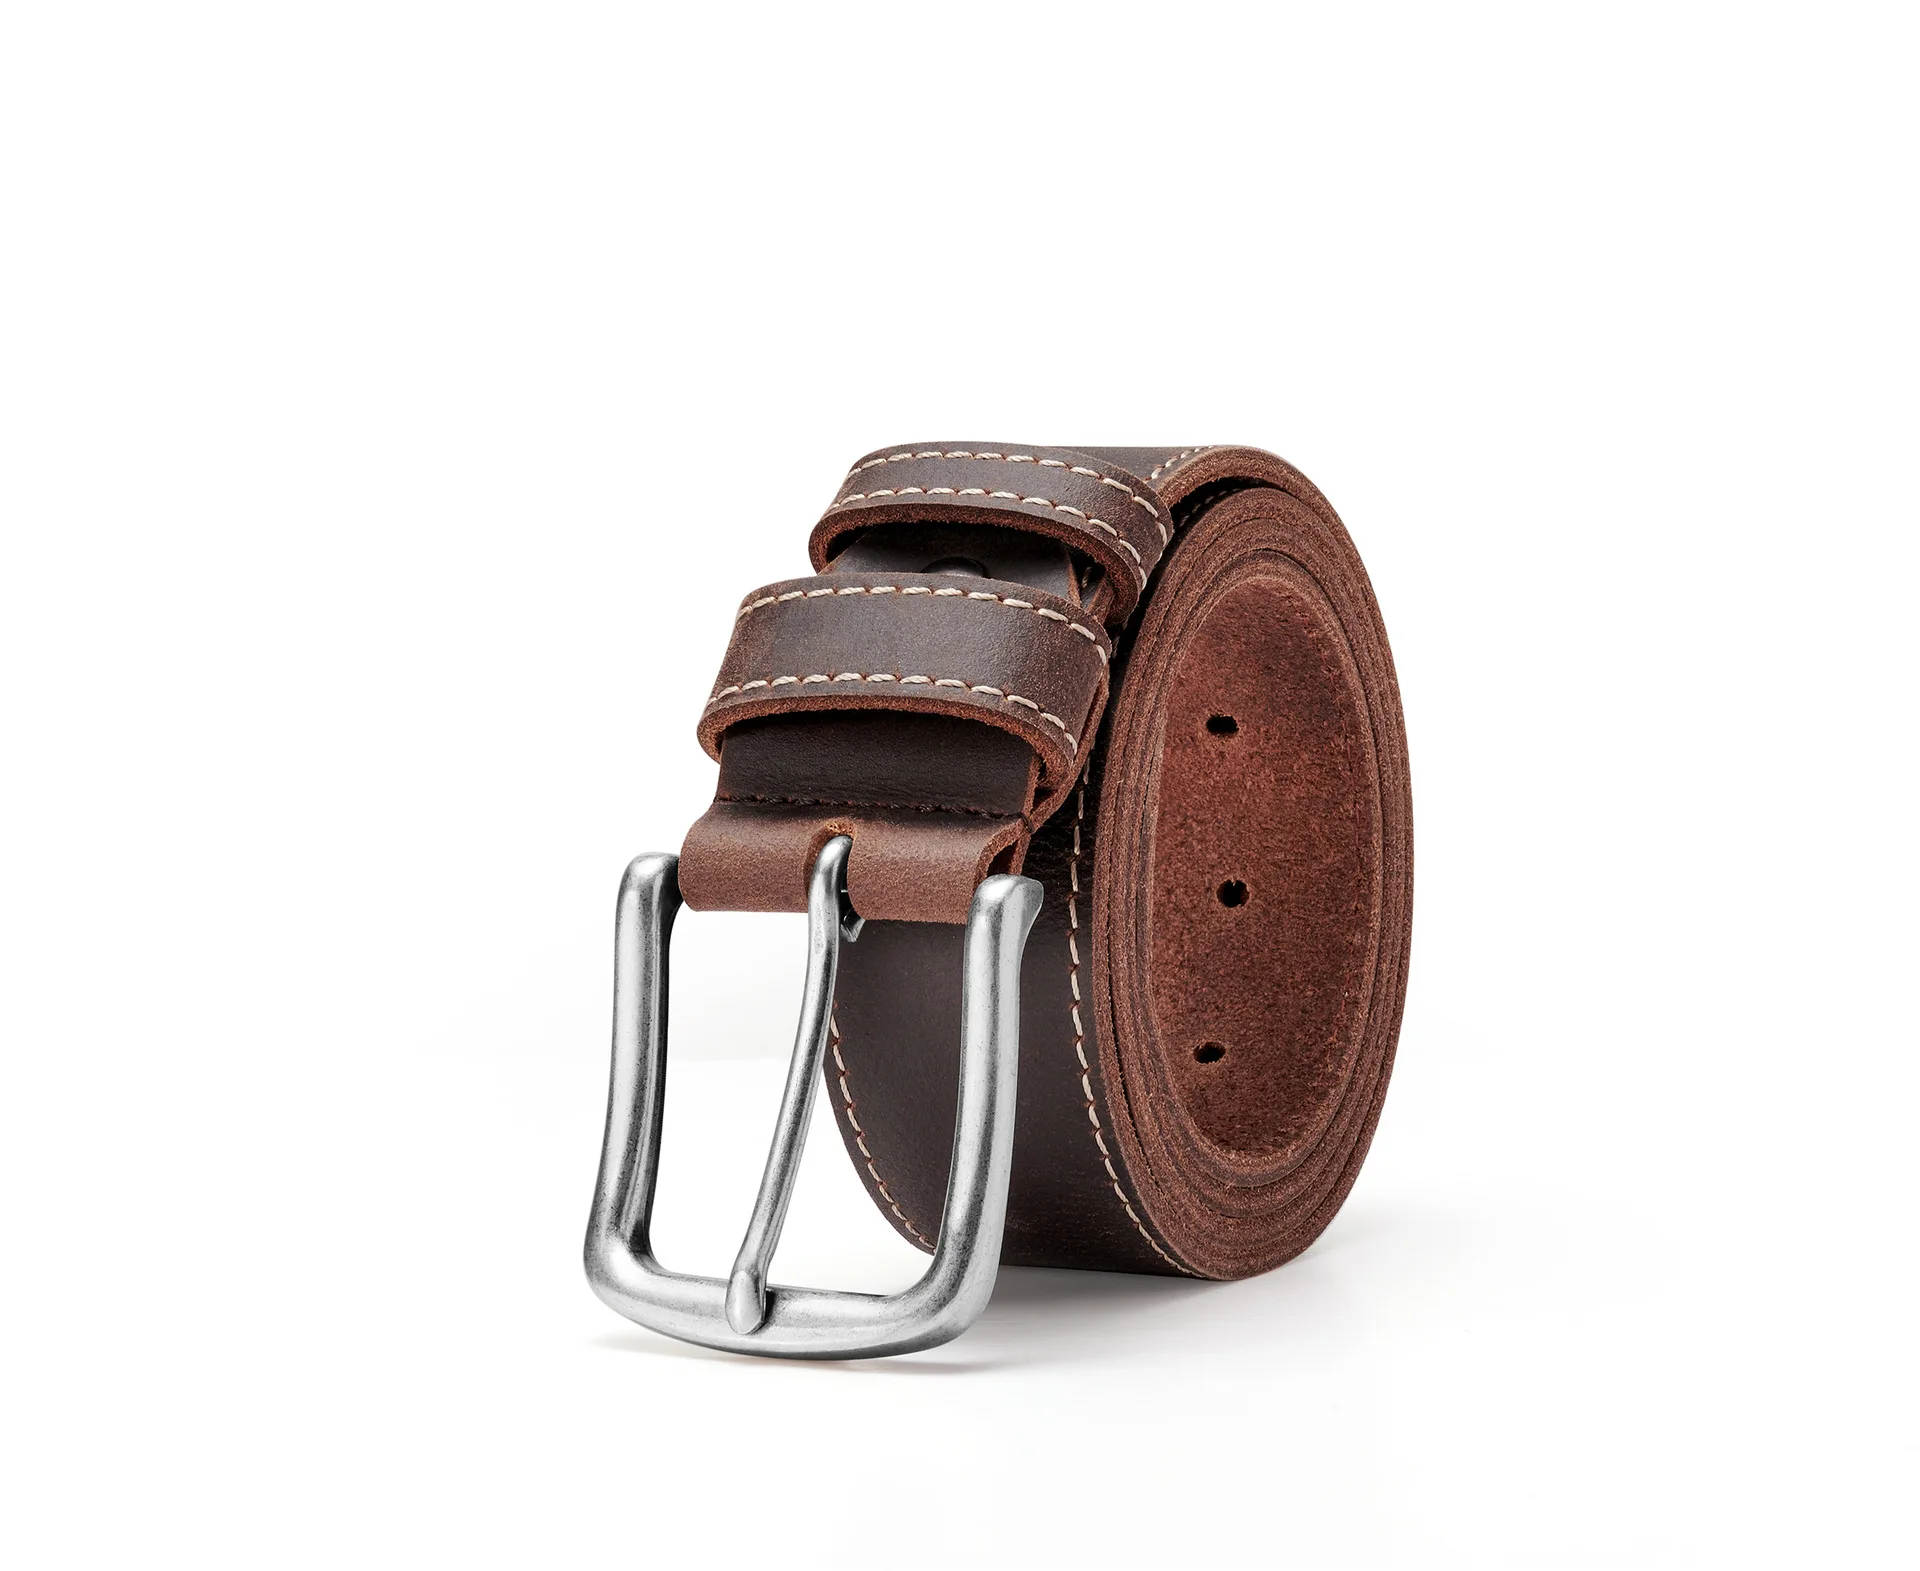 Head layer cow leather belt Men's fashion Retro oil wax needle buckle Leather belt Cowhide belt Vegetable tanned leather